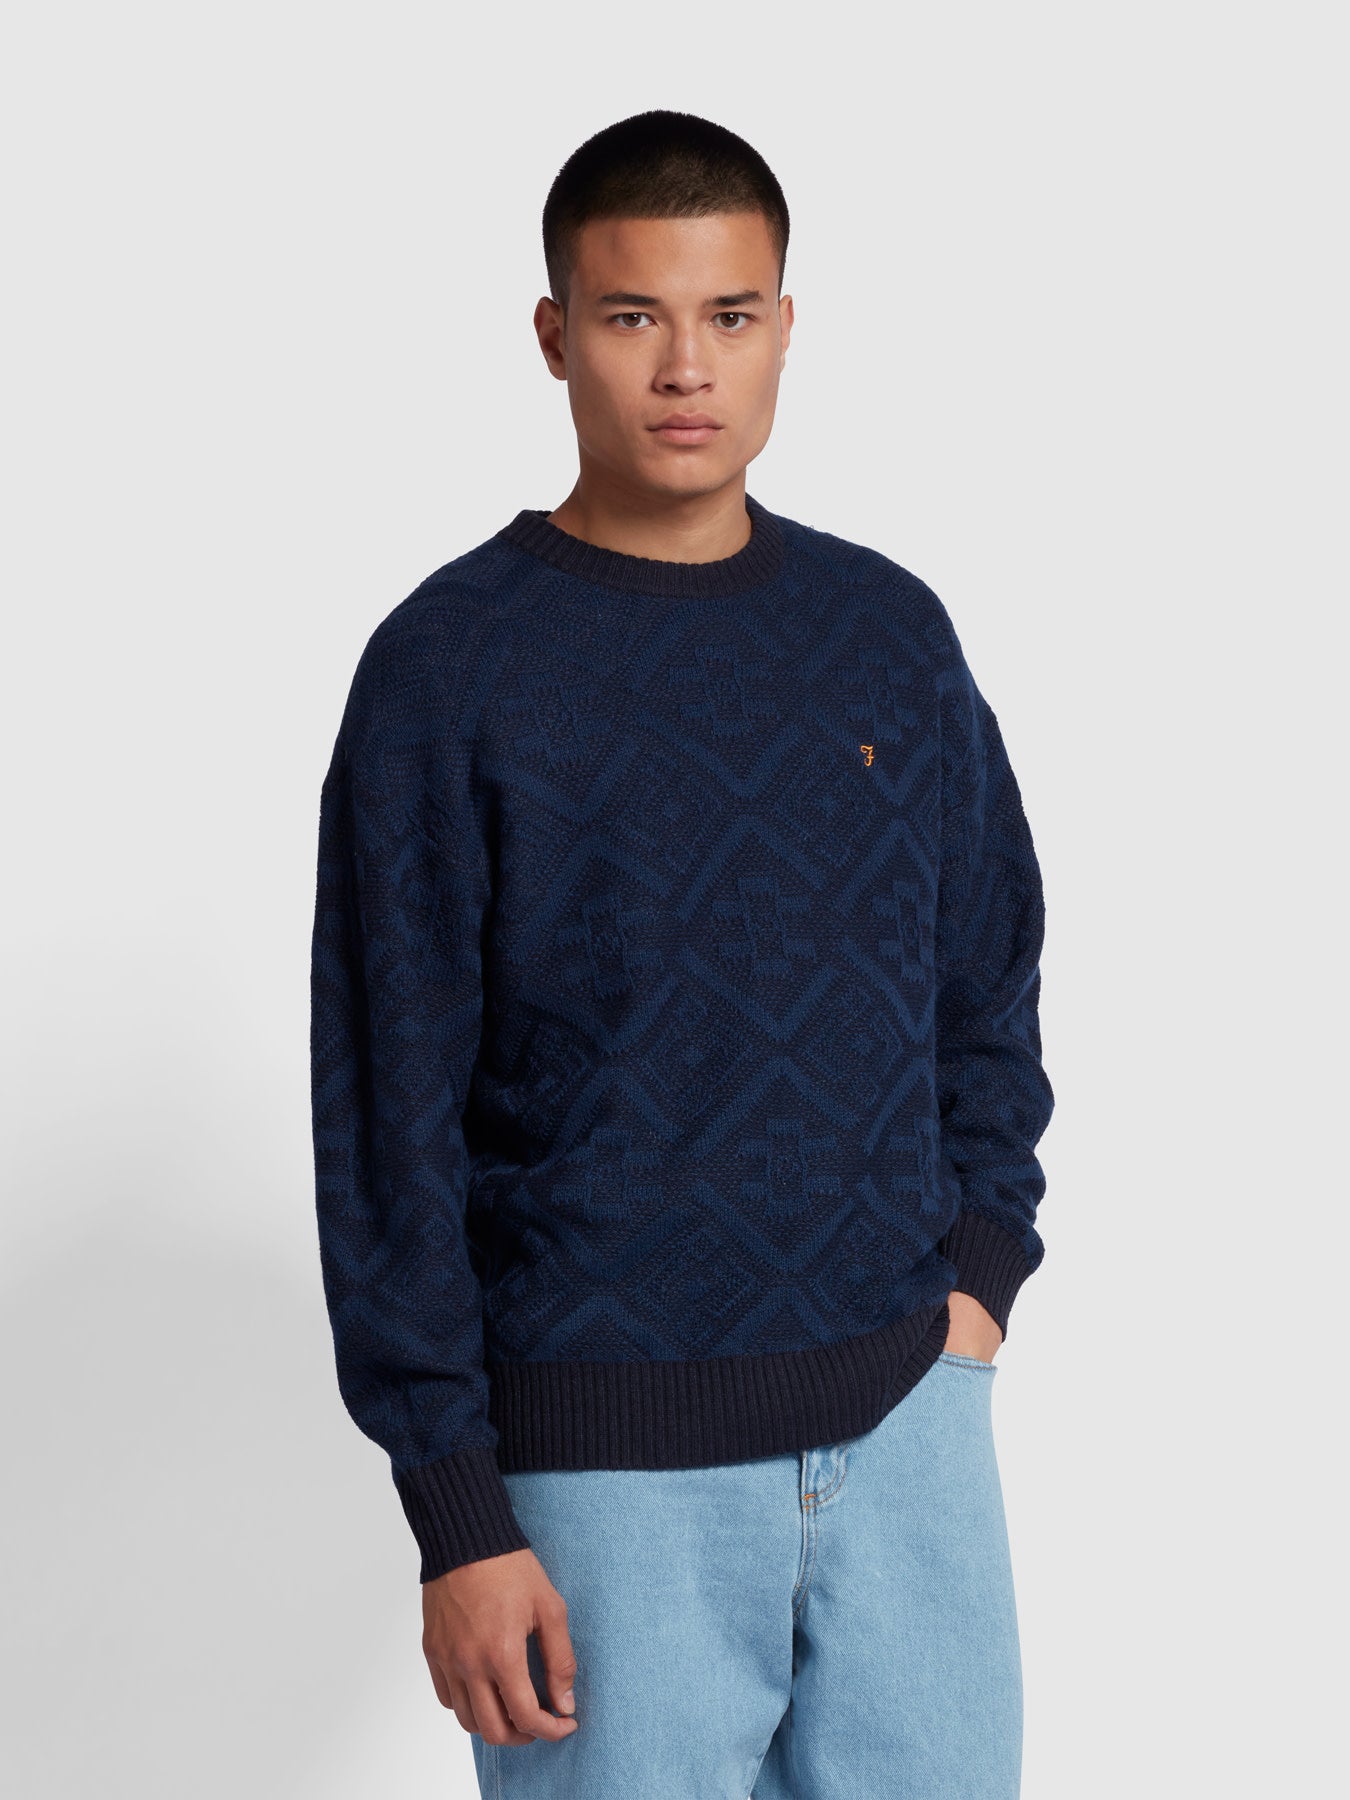 View Roma Archive Textured Knit Crew Neck Sweater In True Navy information